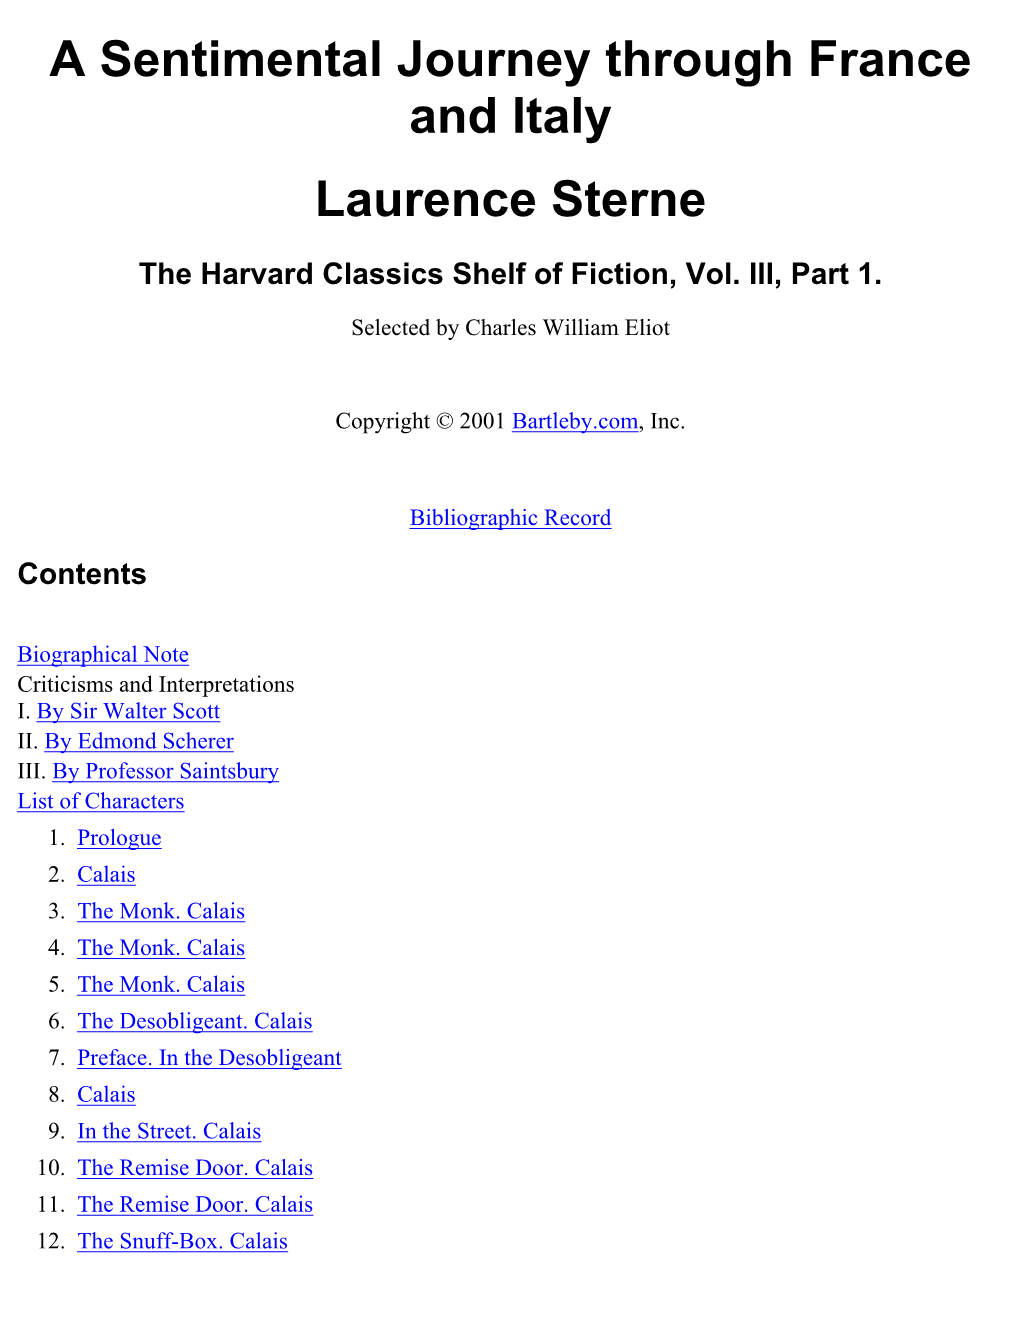 A Sentimental Journey Through France and Italy Laurence Sterne